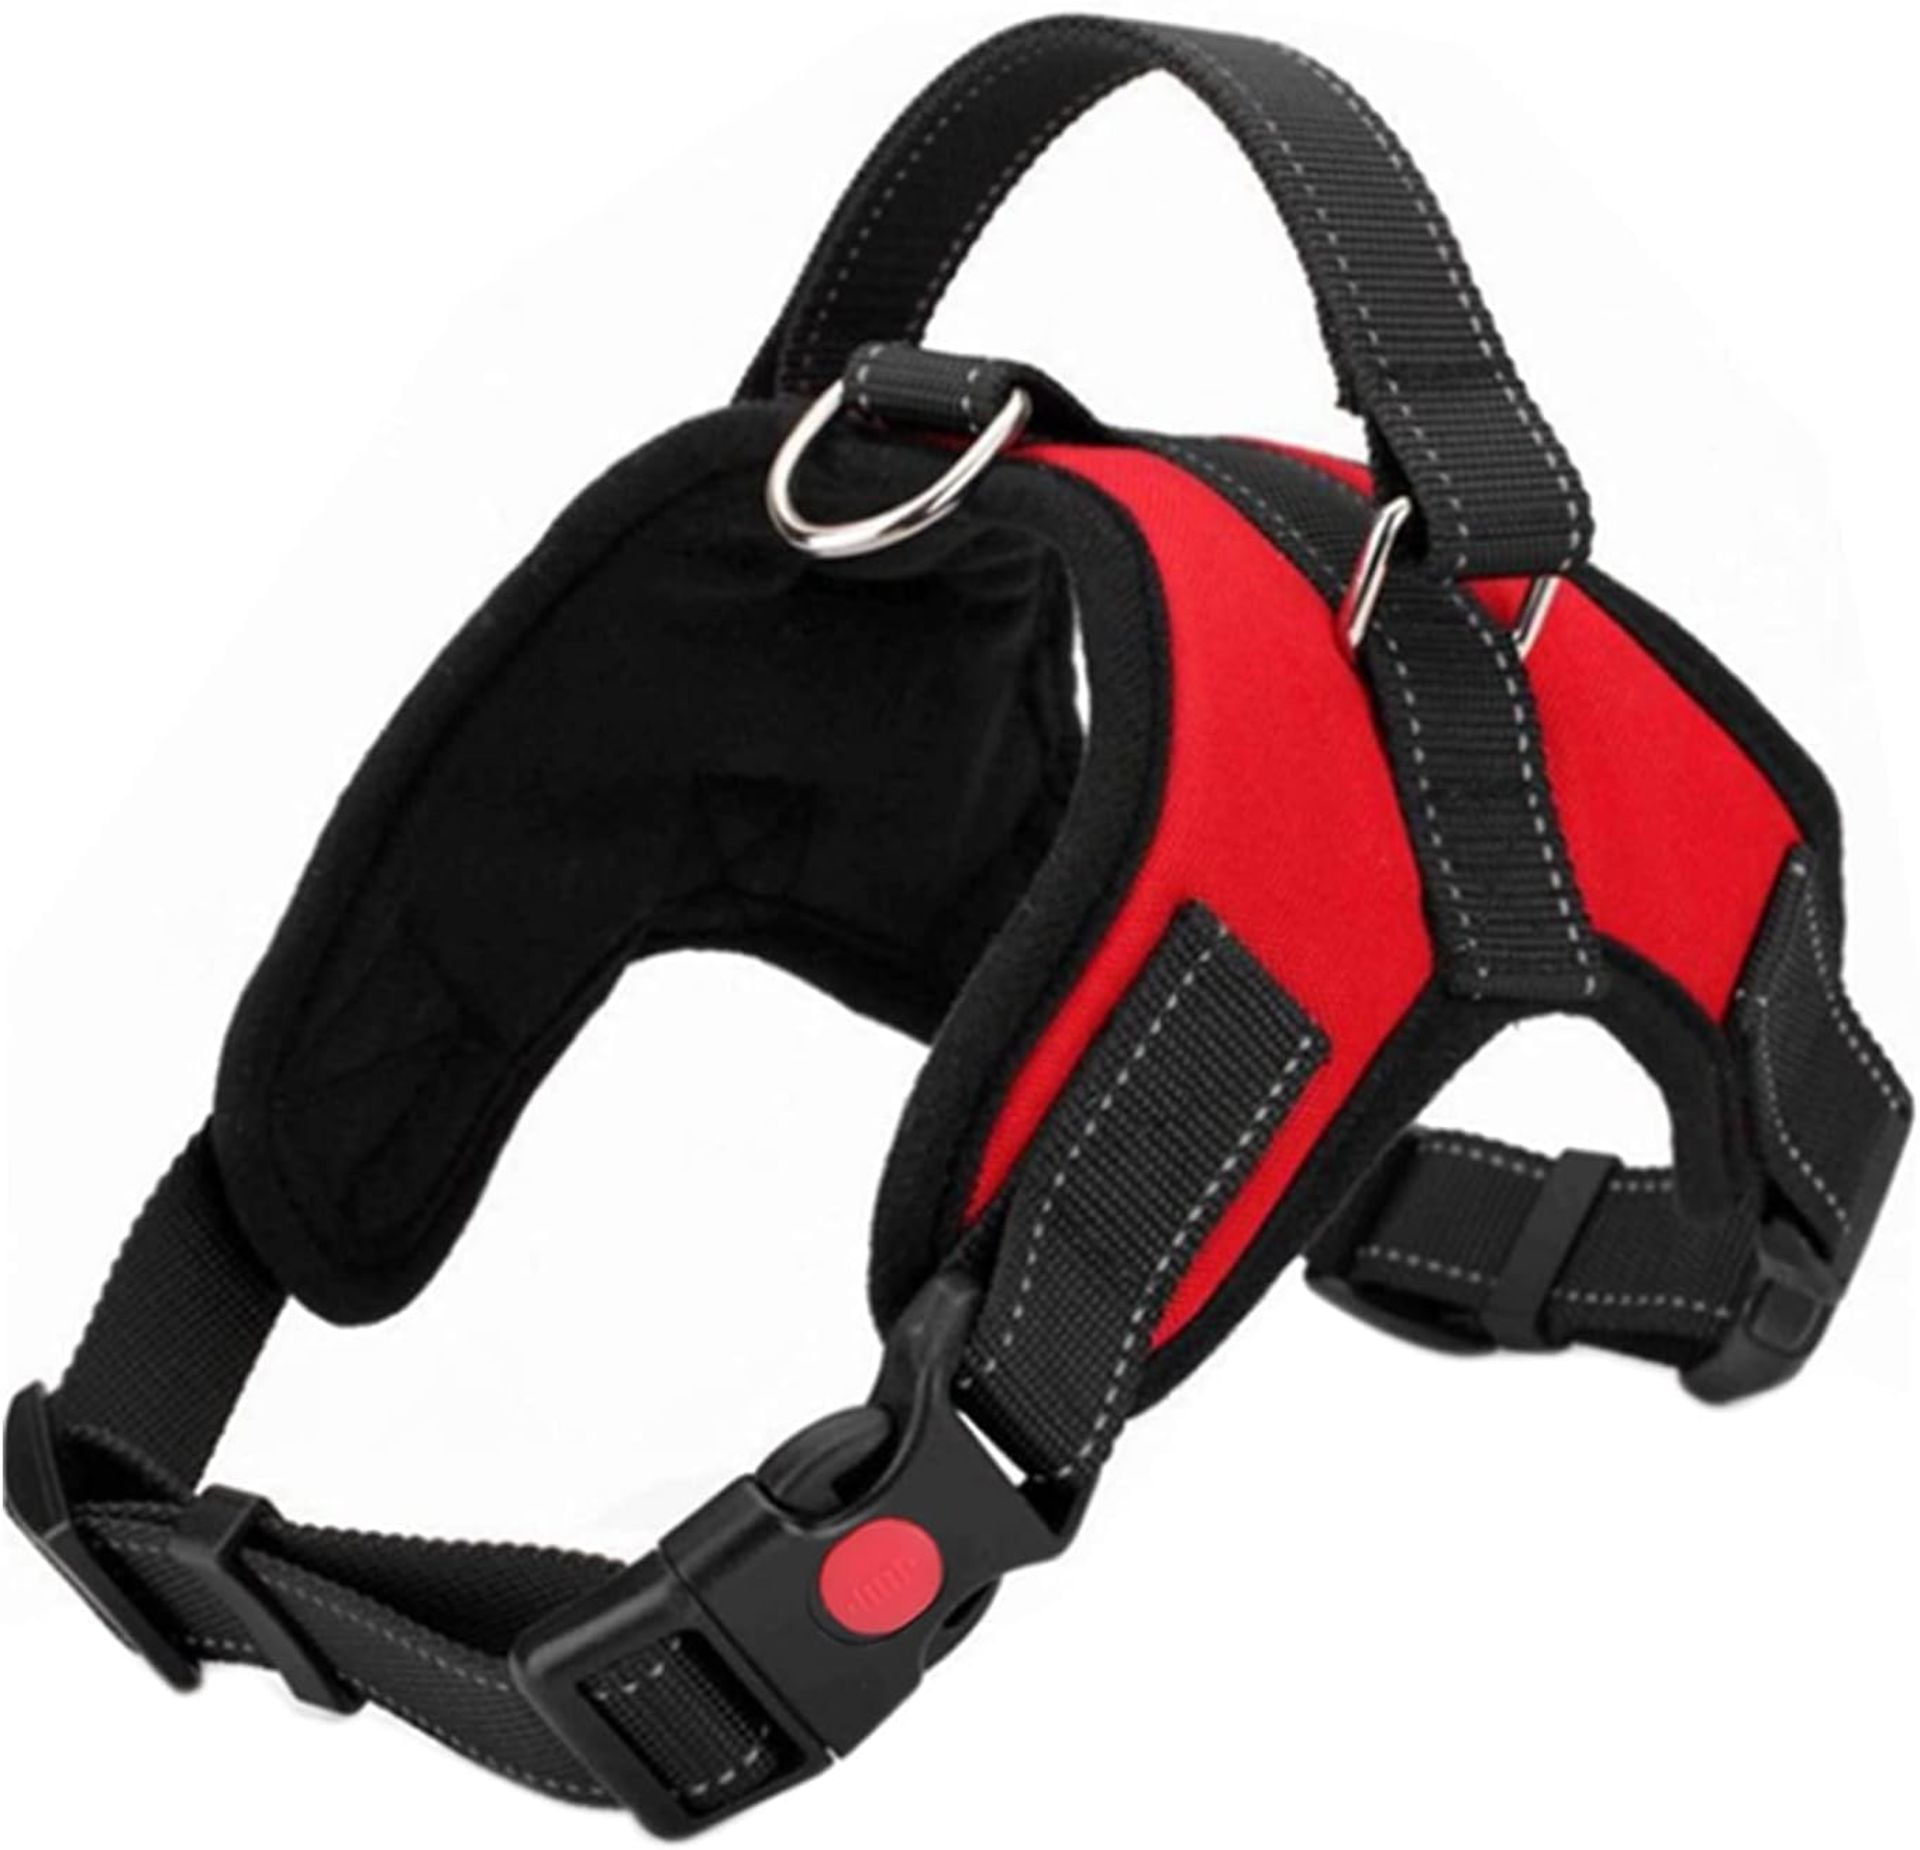 300 X JOBLOT DOG HARNESSES STRONG MIXED SIZES AND COLORS